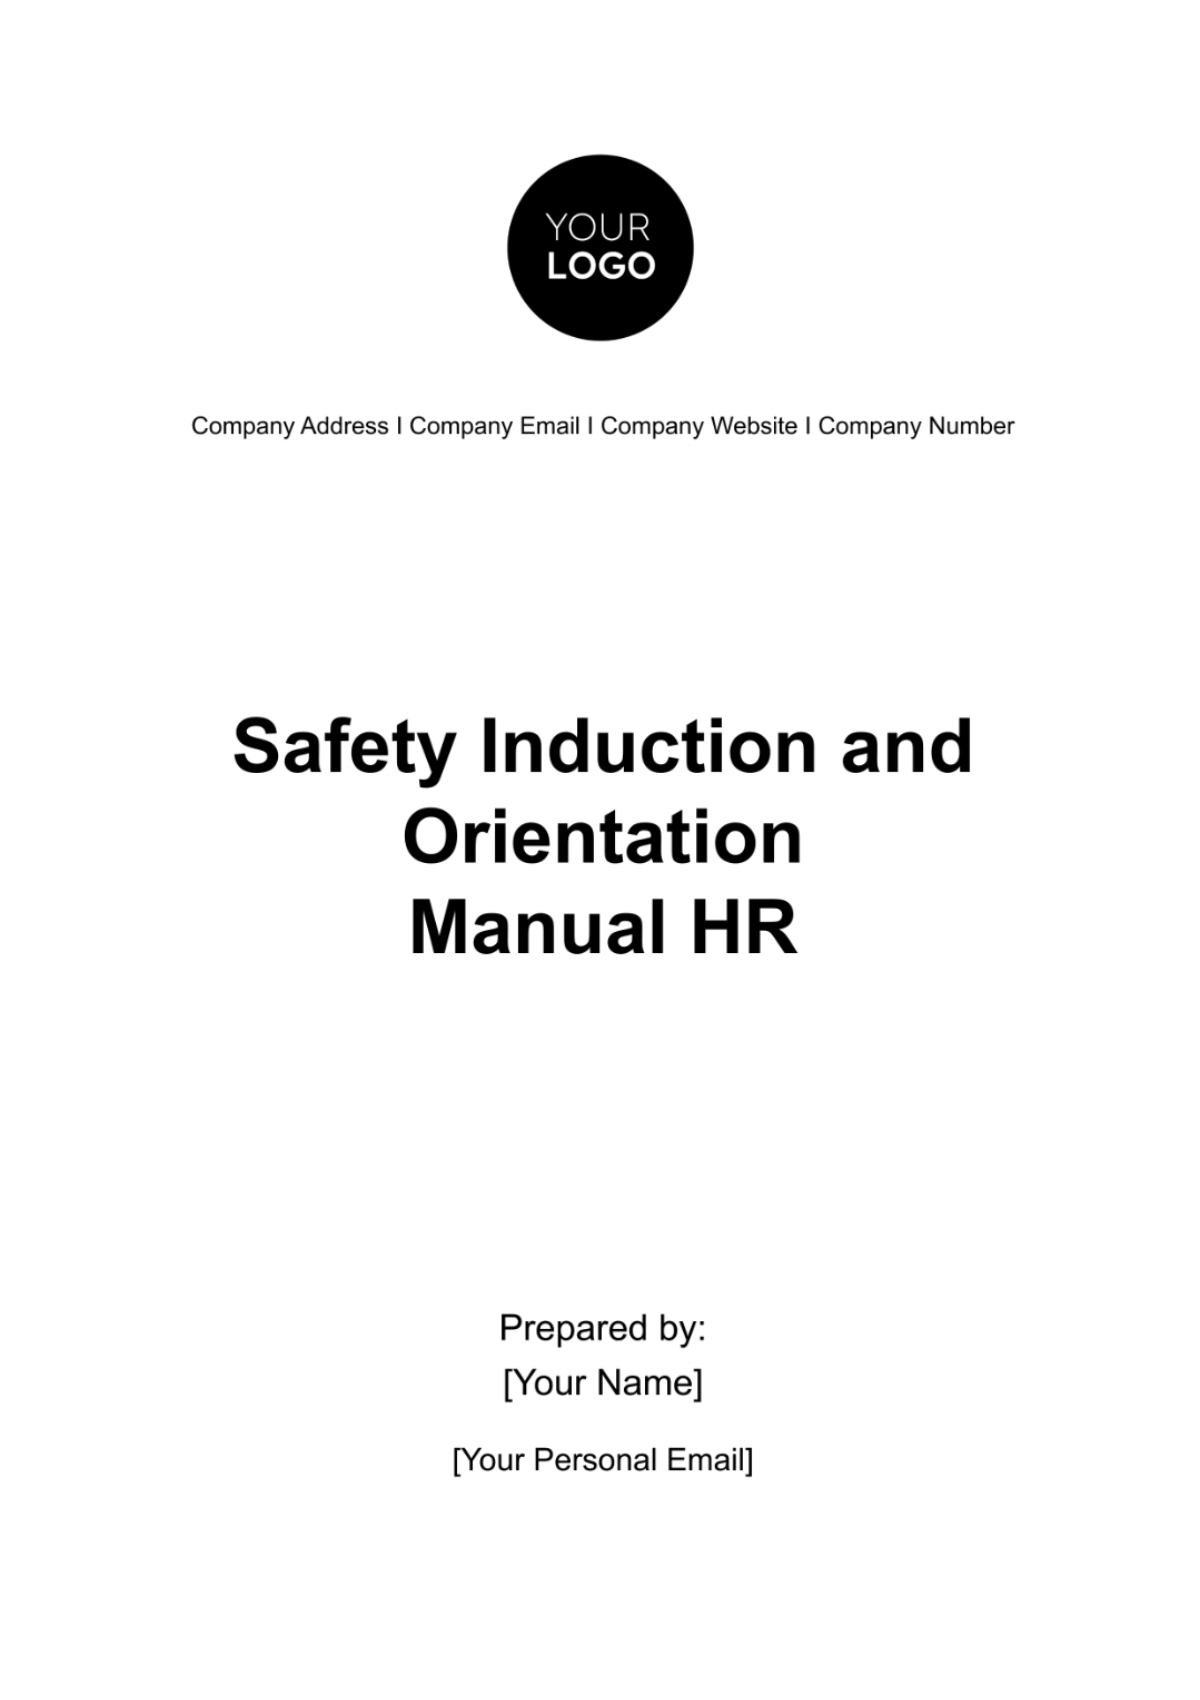 Free Safety Induction and Orientation Manual HR Template